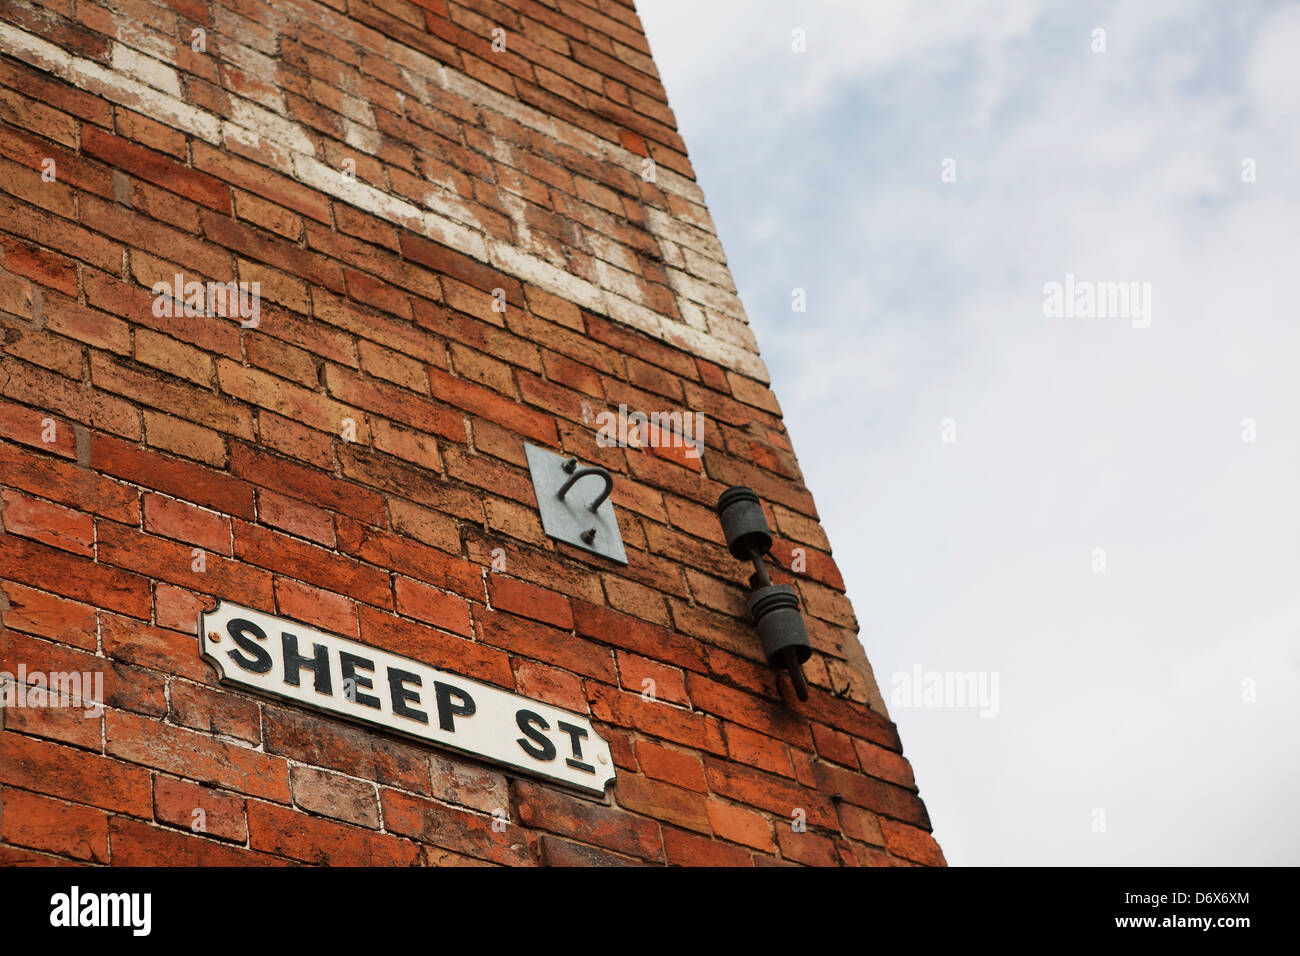 Cast iron road sign (Sheep Street) on Victorian red brick house. Stock Photo